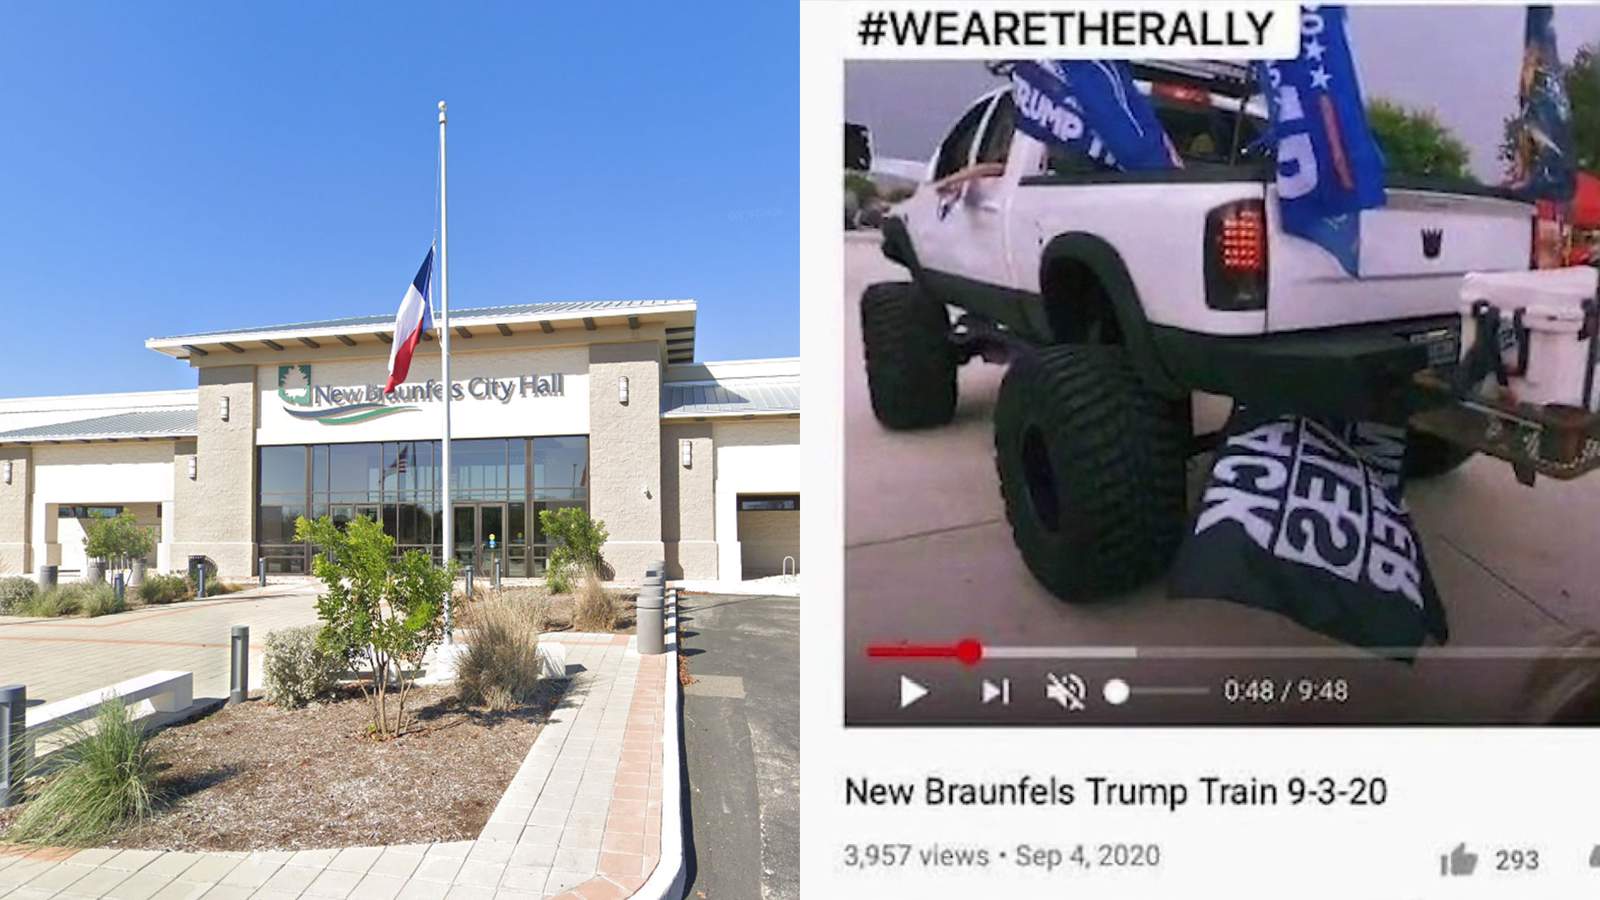 New Braunfels mayor responds after image surfaces of BLM flag dragged under truck at Trump rally